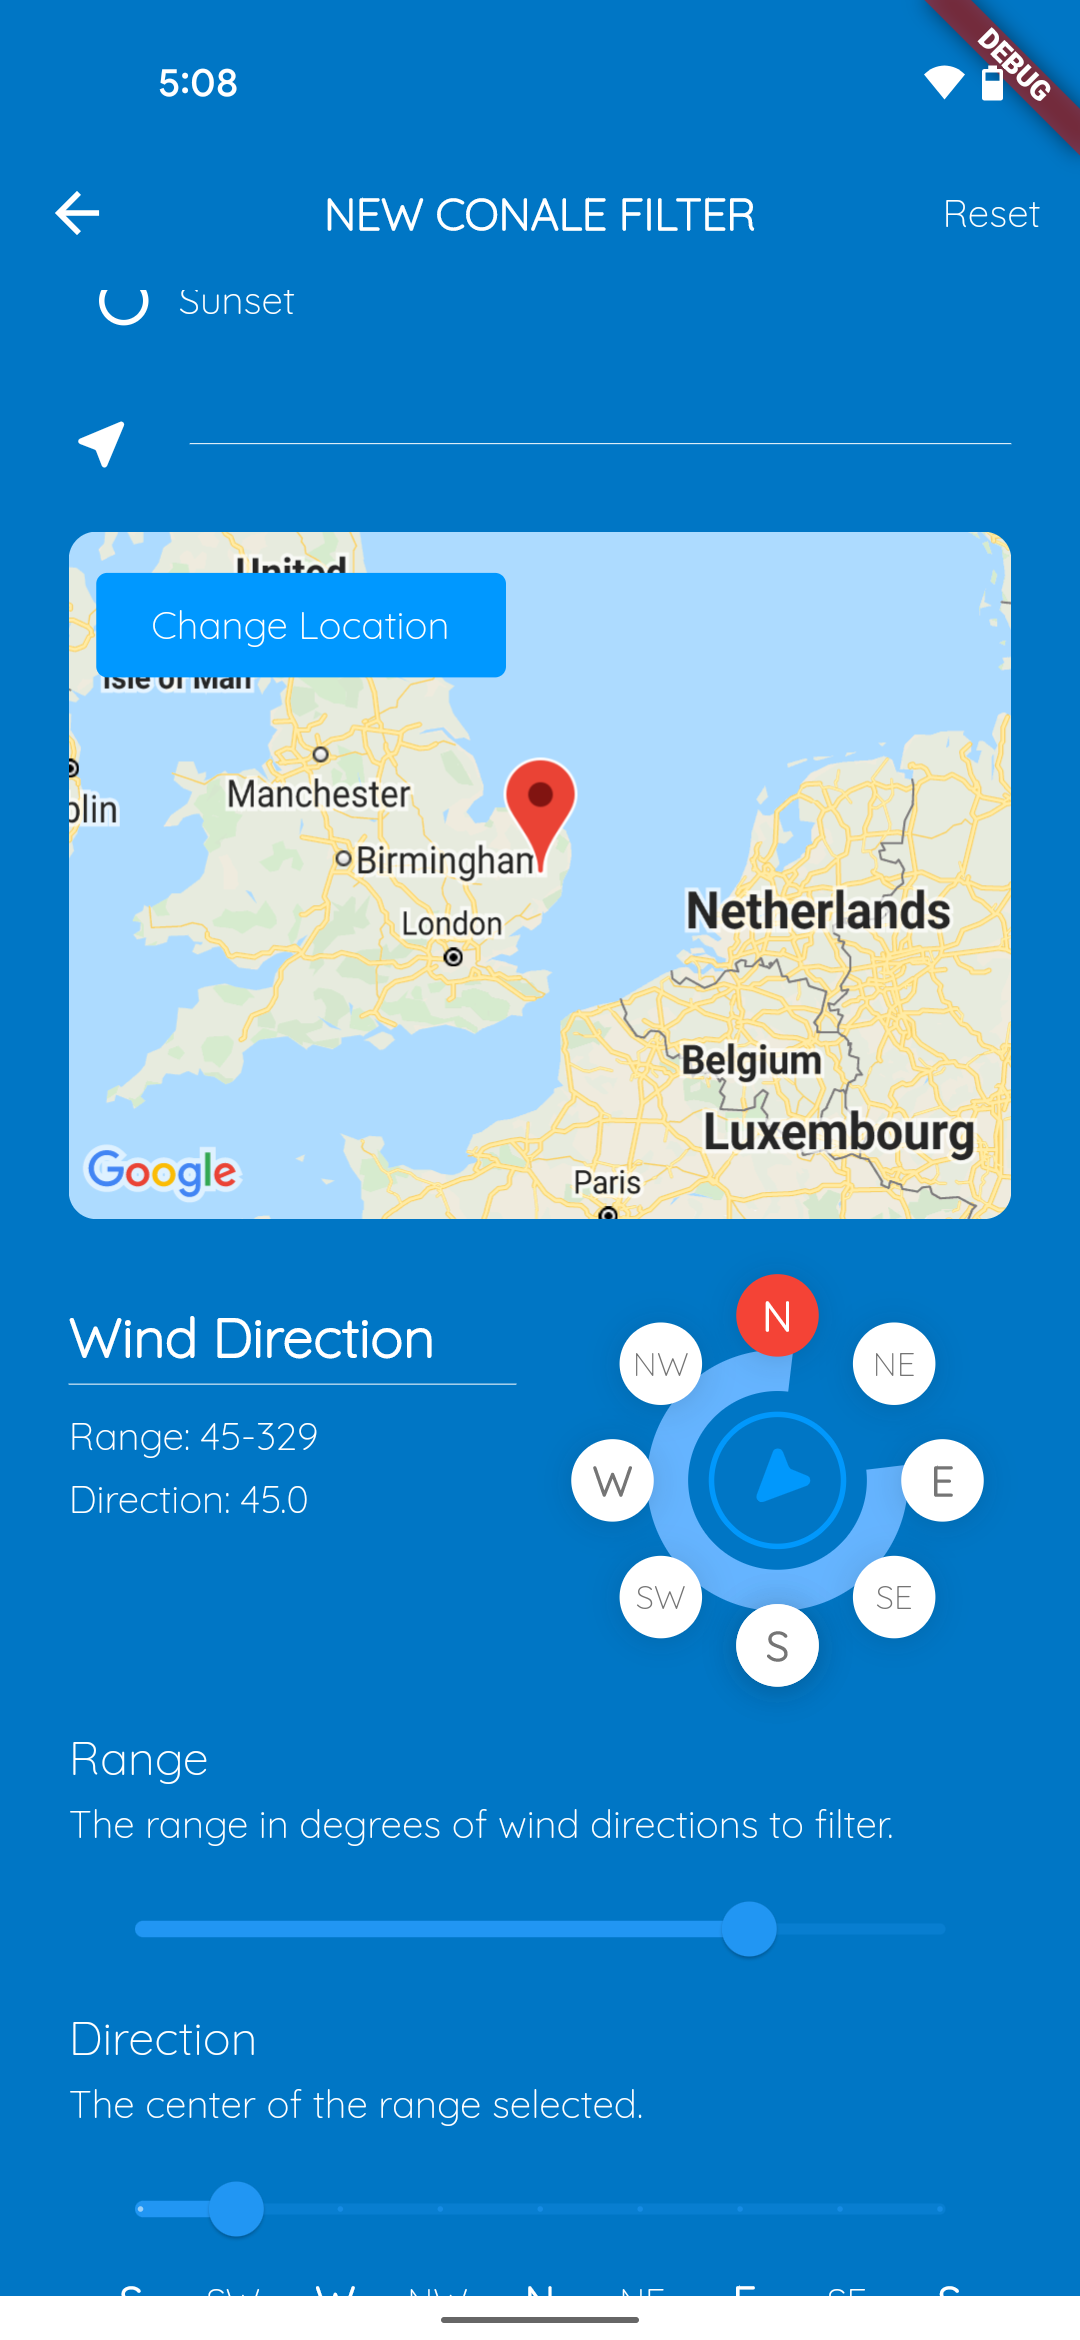 Add filter page with location and wind direction input.